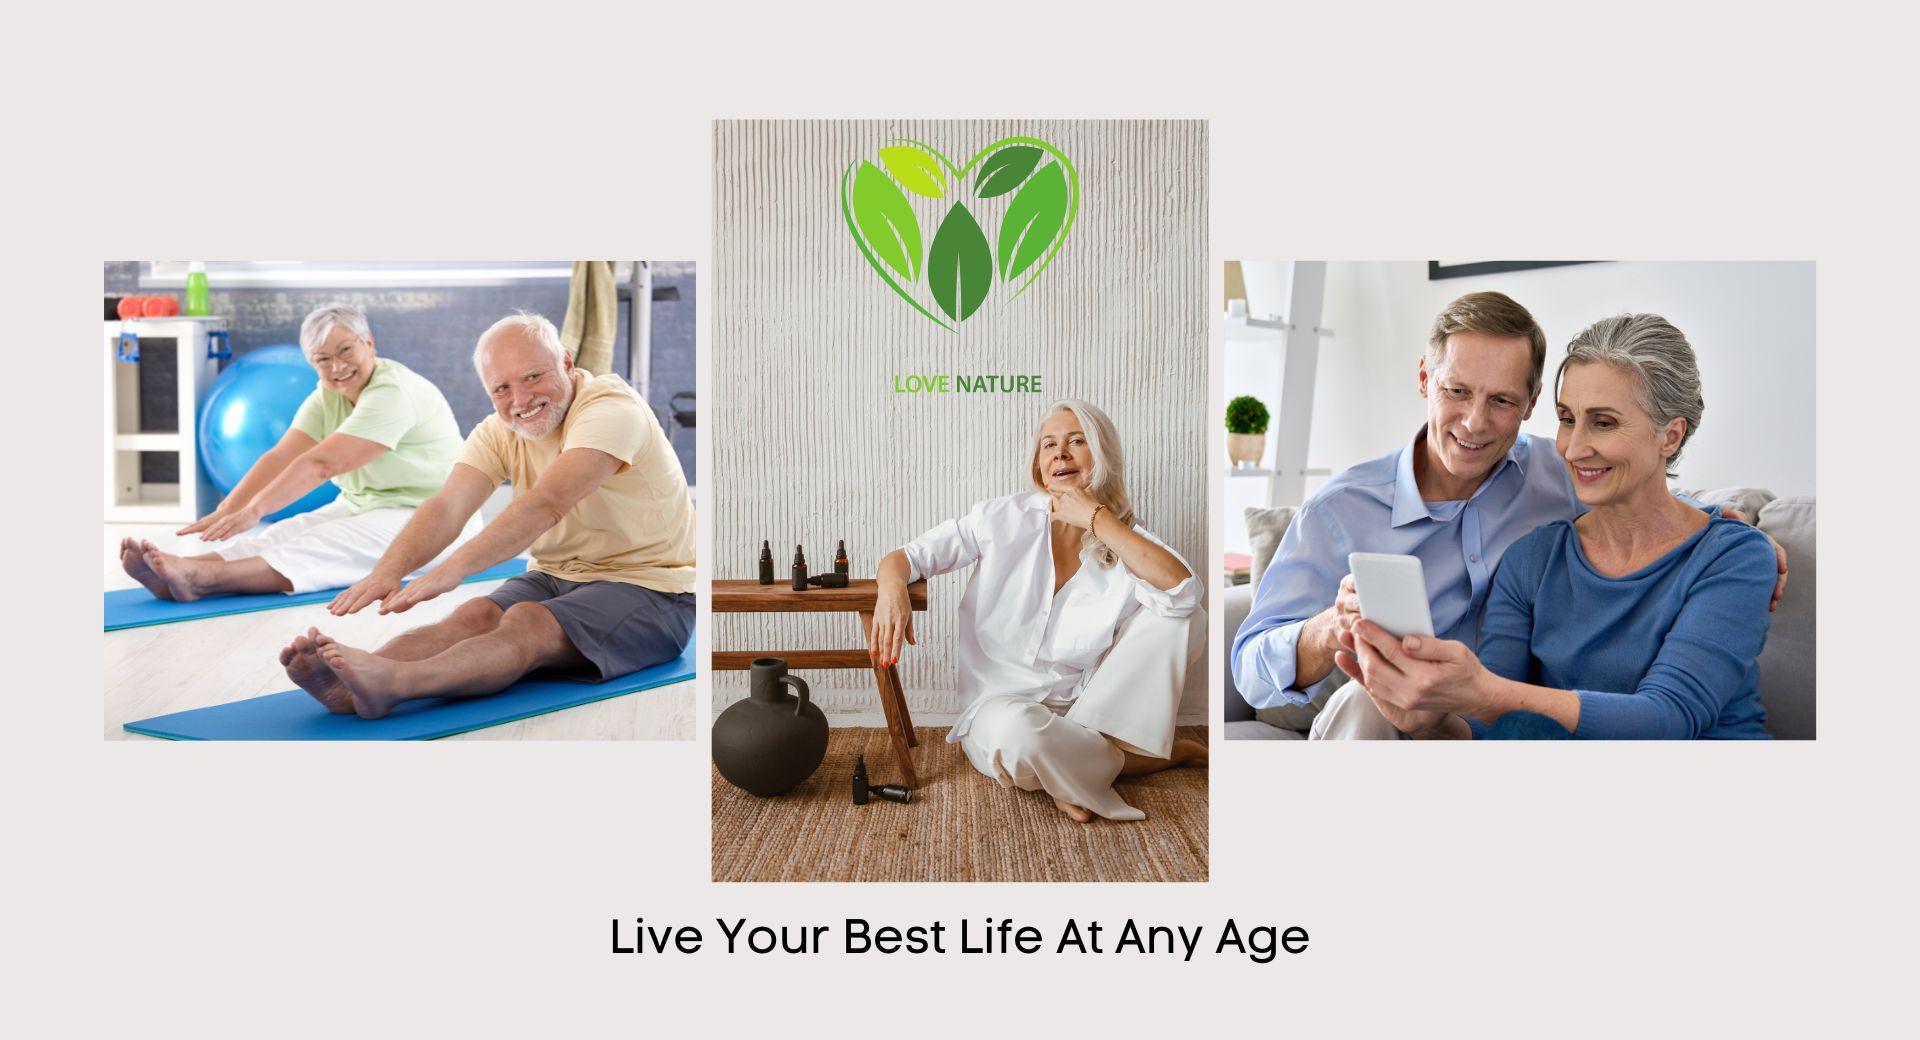 Live your best life at any age. Exercising man and woman, a couple talking with family, and a woman sitting with her diy essential oils - Wyndmere Naturals